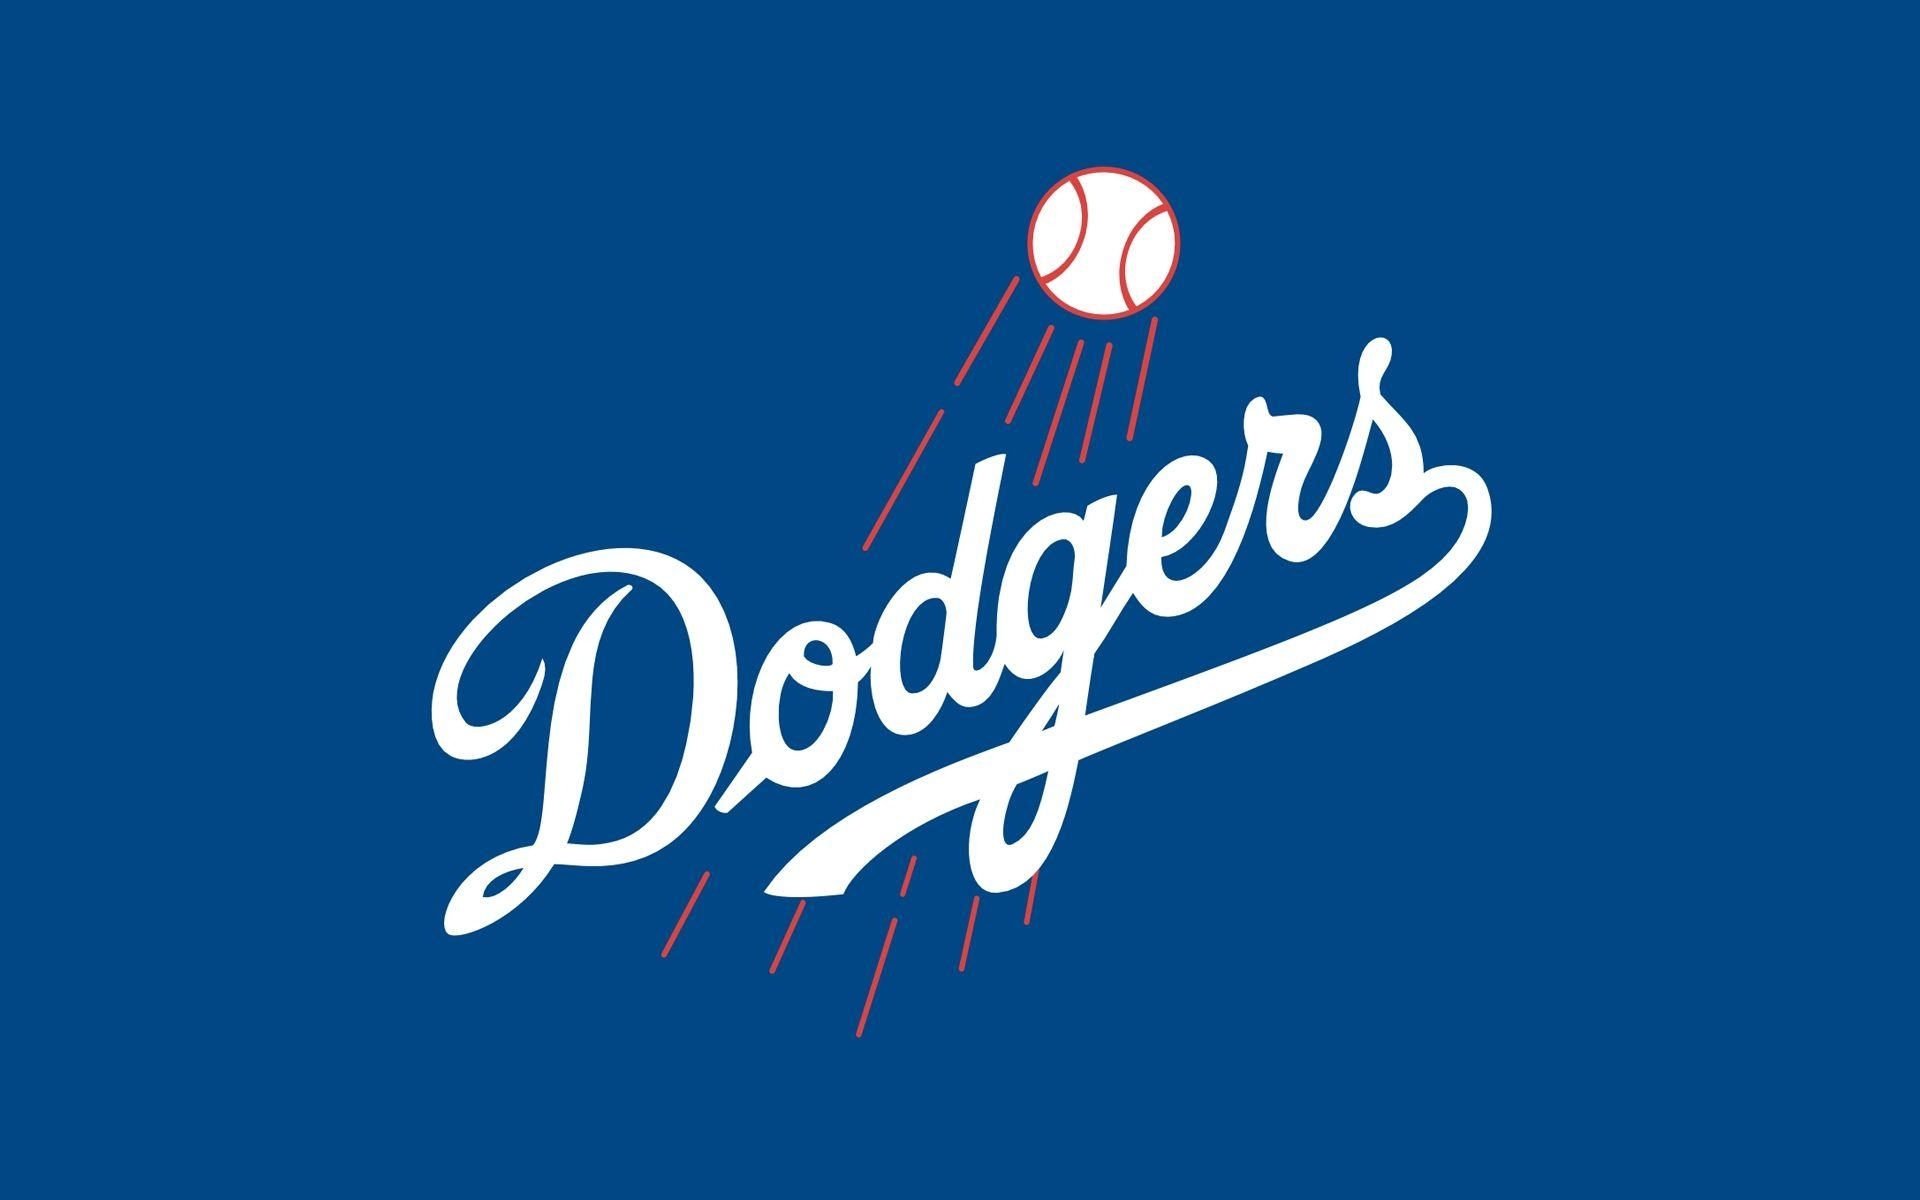 los angeles dodgers wallpapers - wallpaper cave